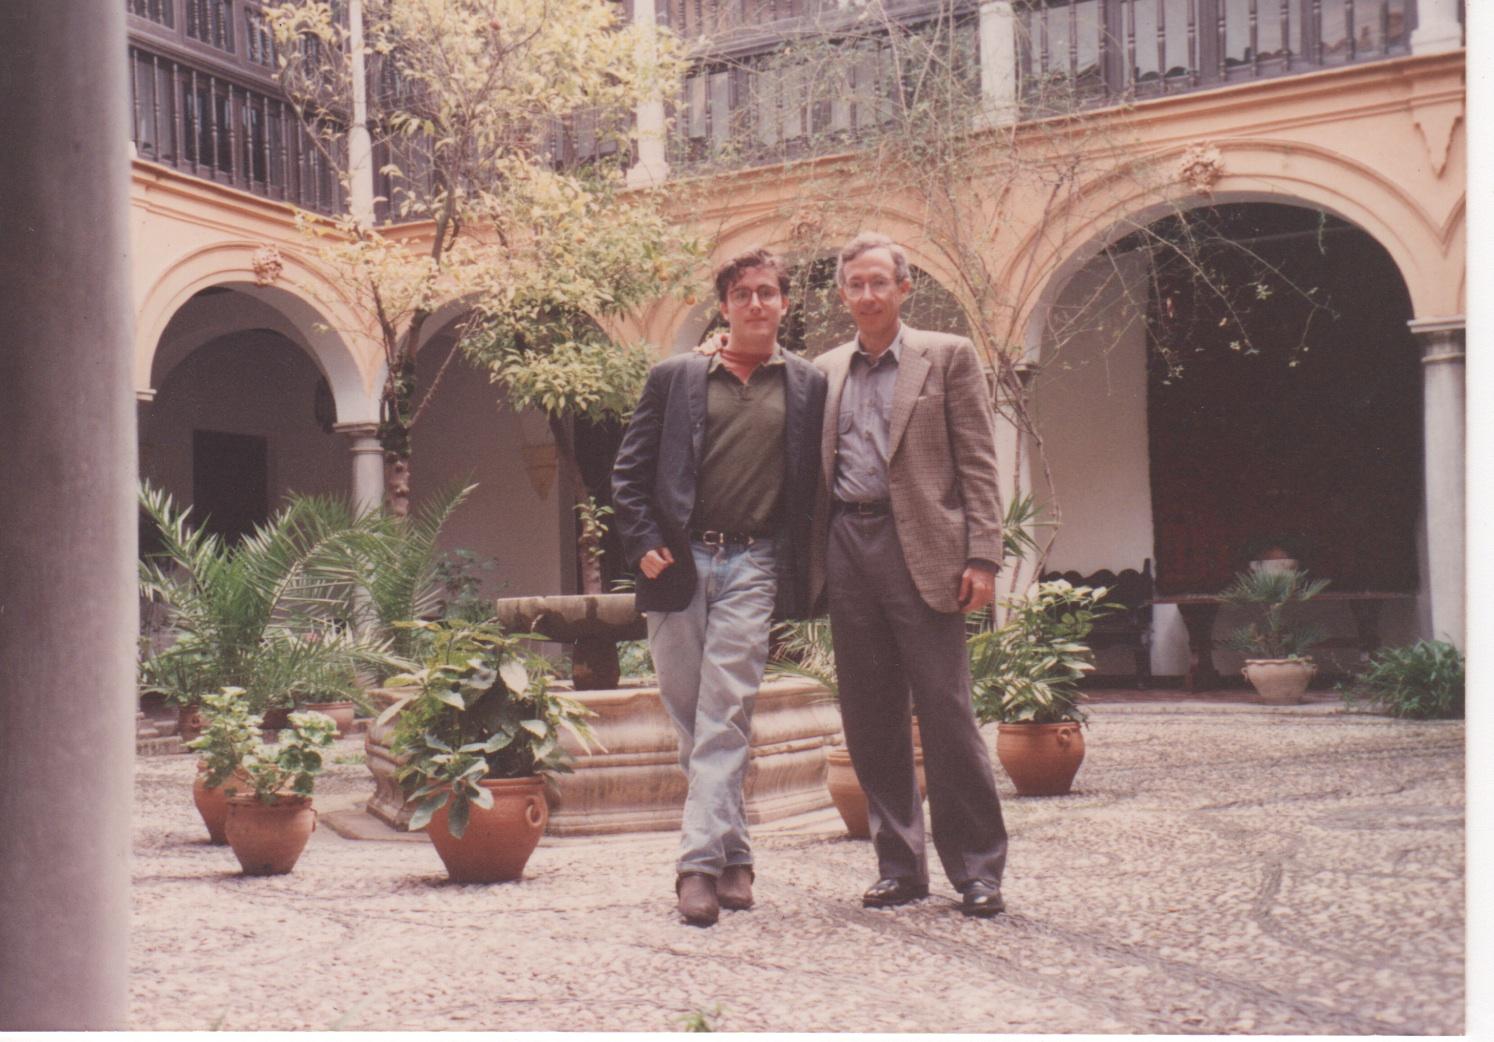 Two men stand in a Spanish courtyard.